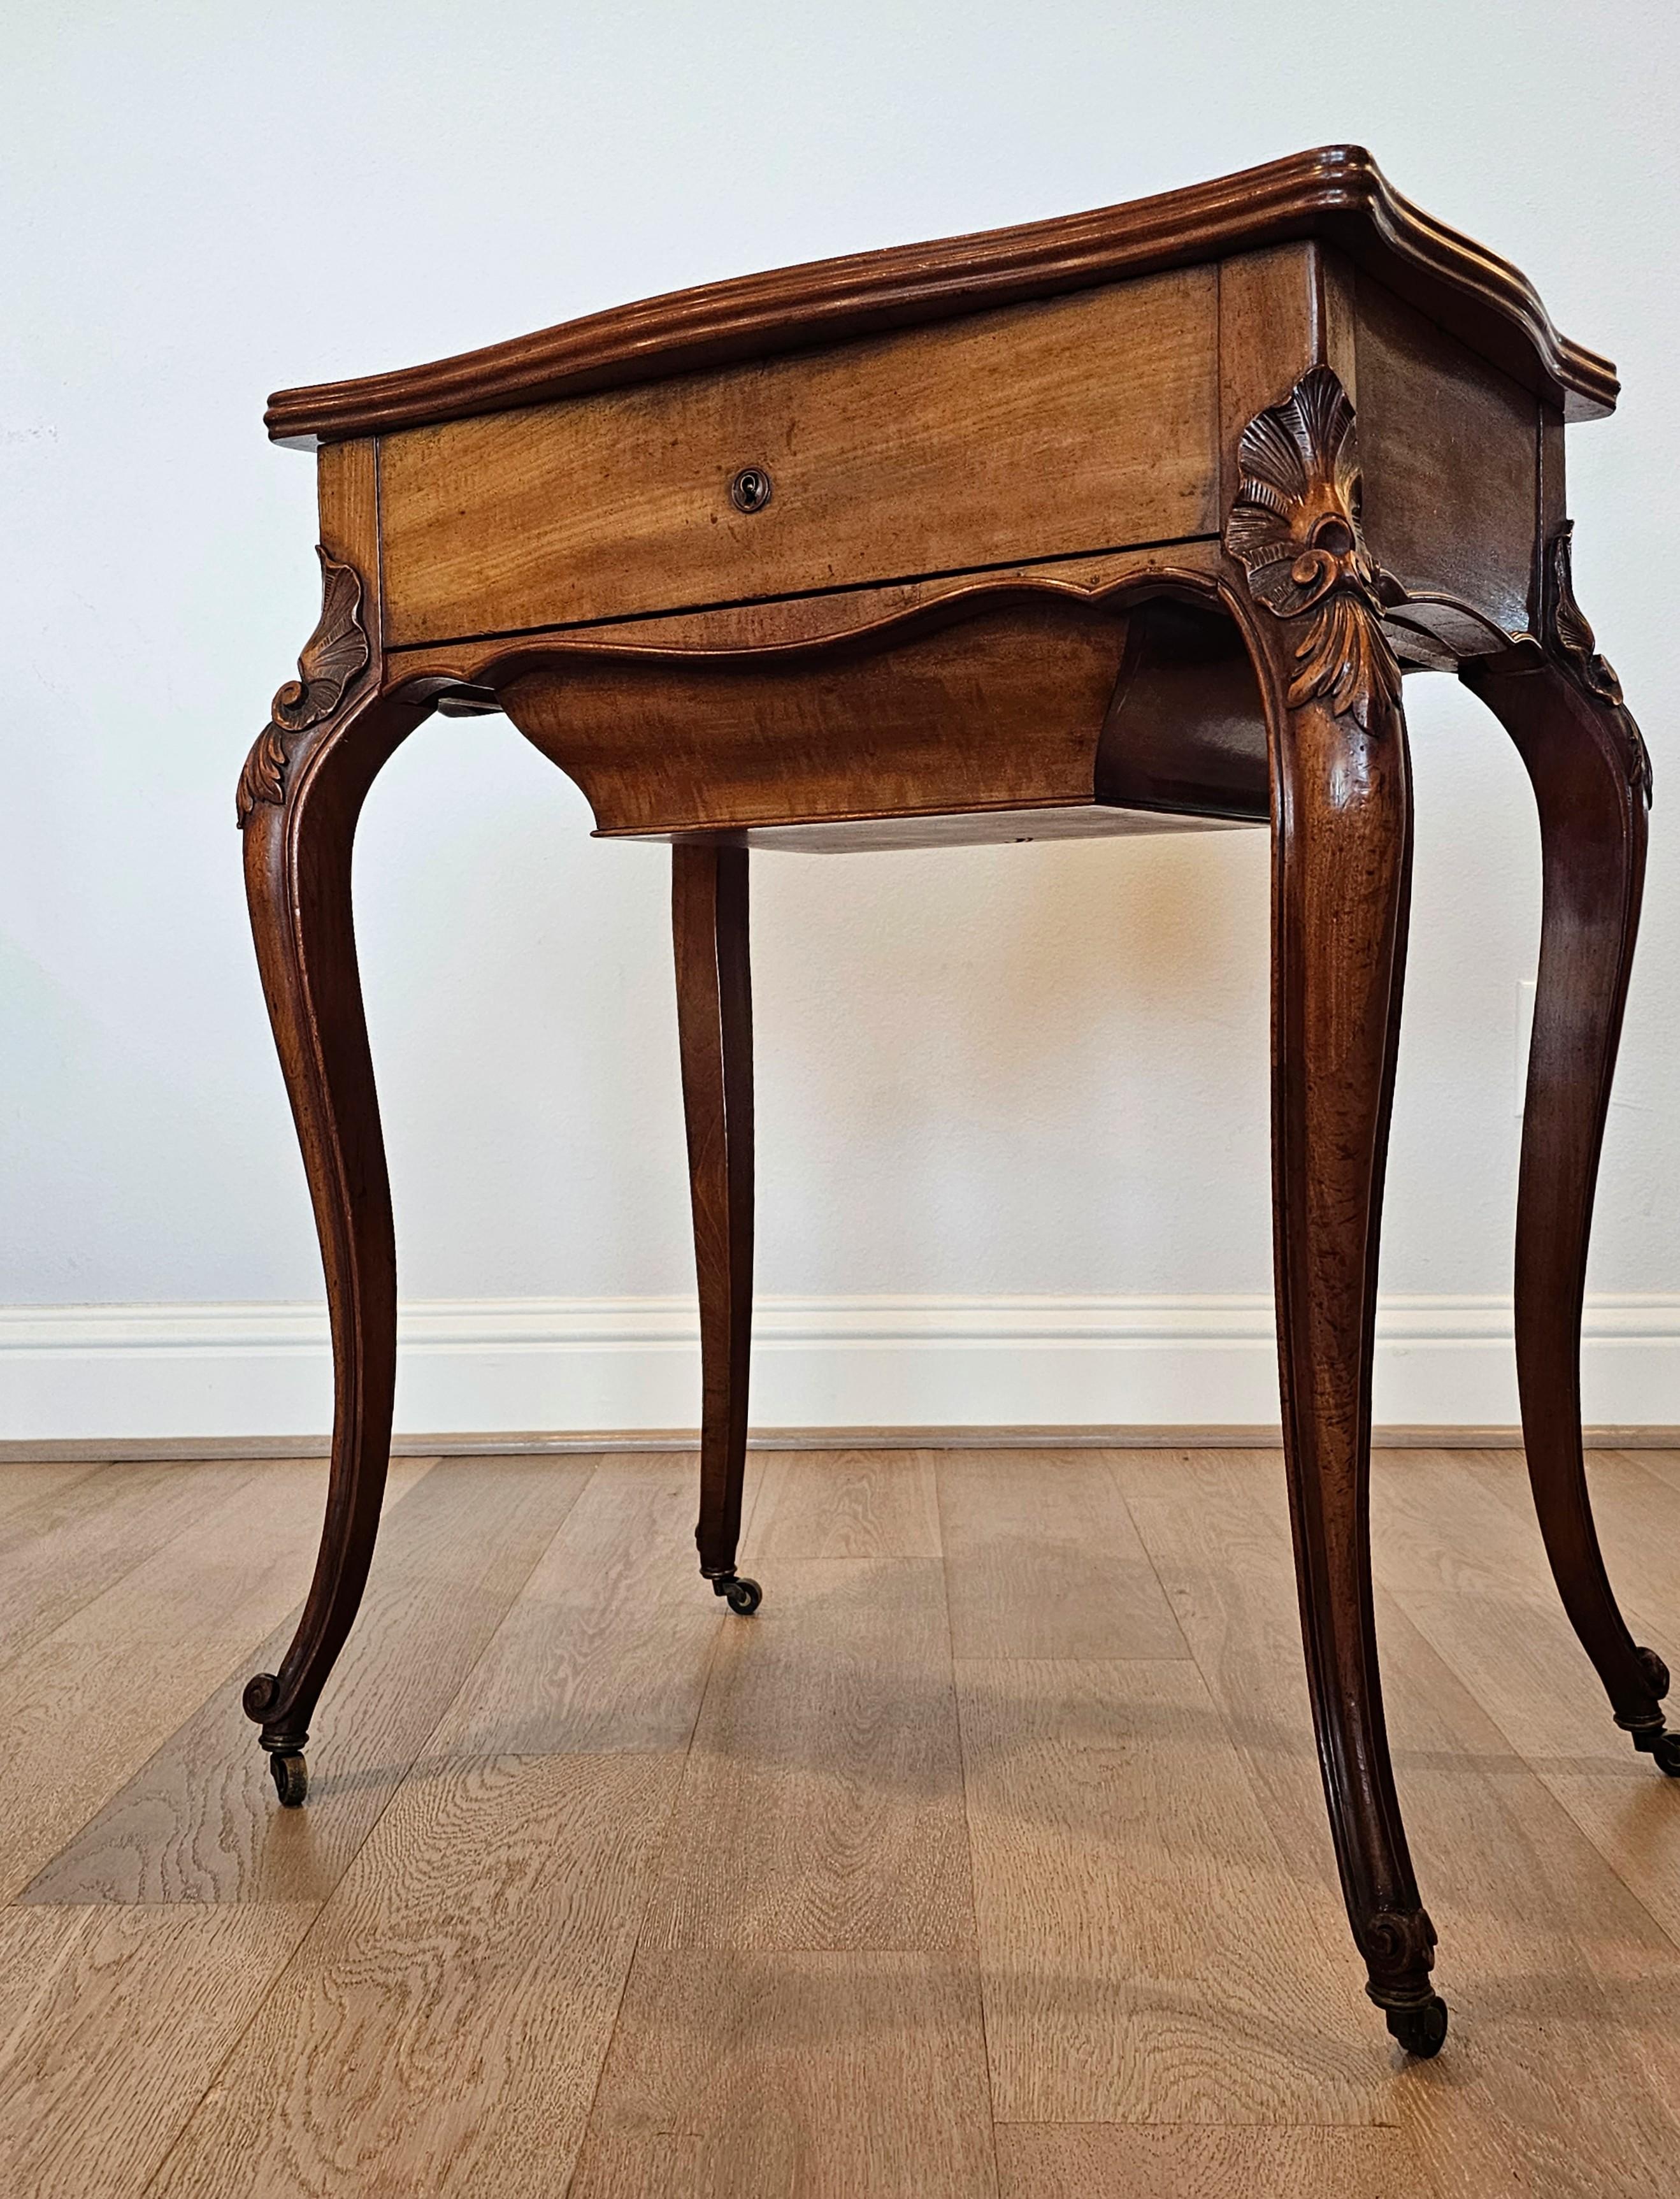 Refined country French elegance and sophistication at its finest, this Provincial Louis XV style lady's sewing stand work table or coiffeuse by Ledet et fils exudes refined grace and functionality. 

Born in Bordeaux Region of Southwestern France in